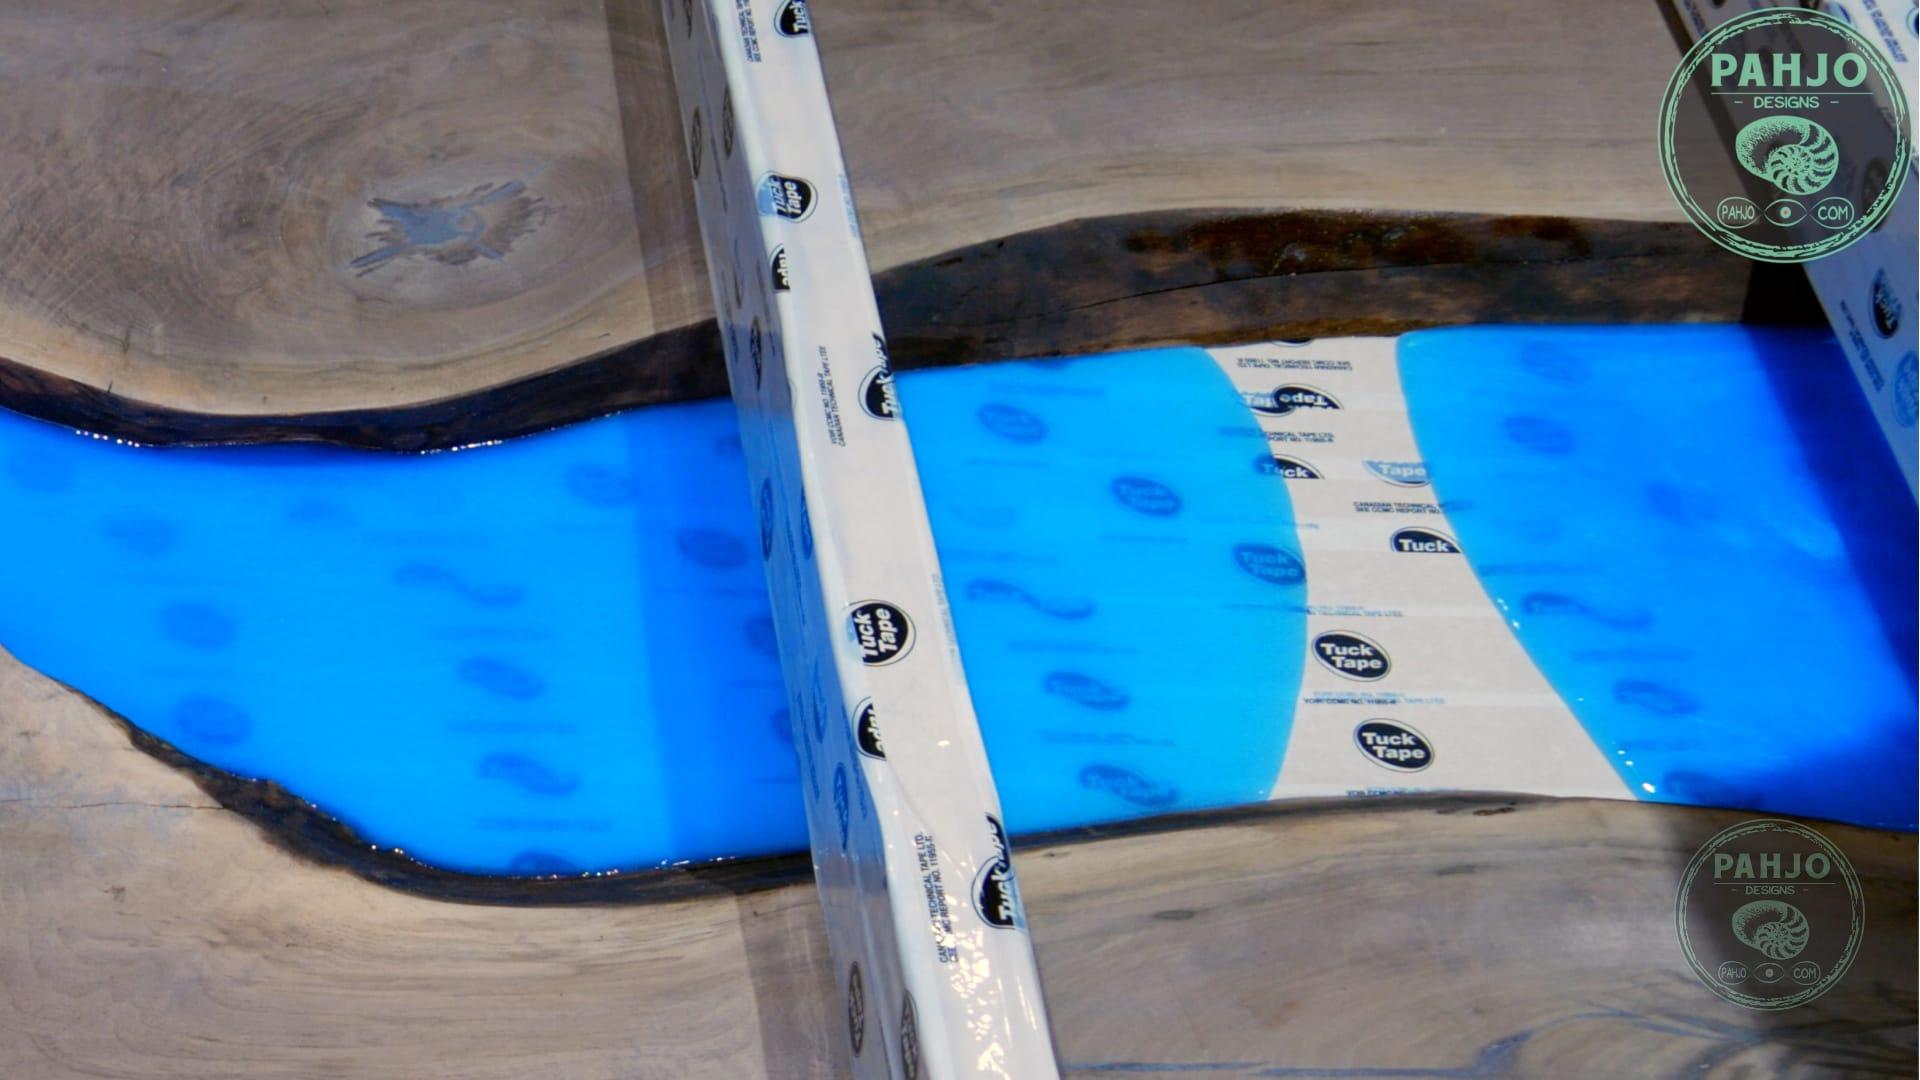 How To Make Epoxy Resin Table Mold 44.jpg